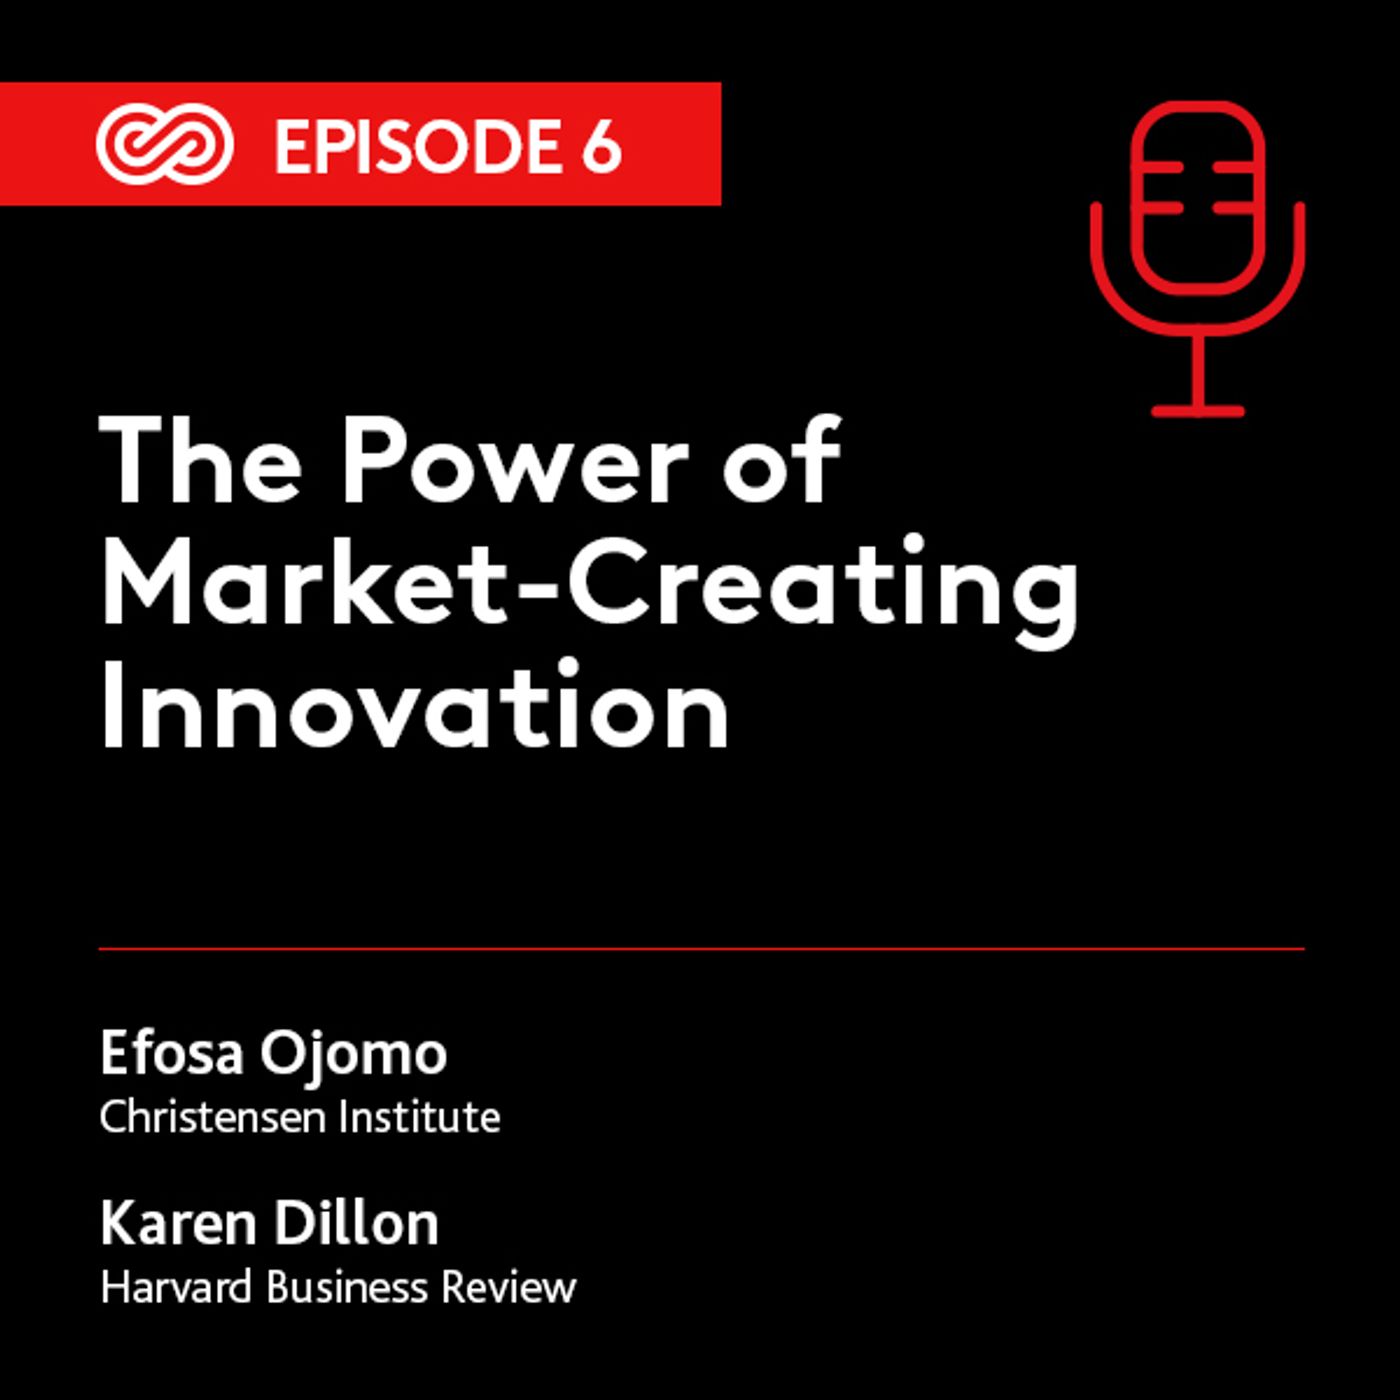 6 - The Power of Market-Creating Innovation